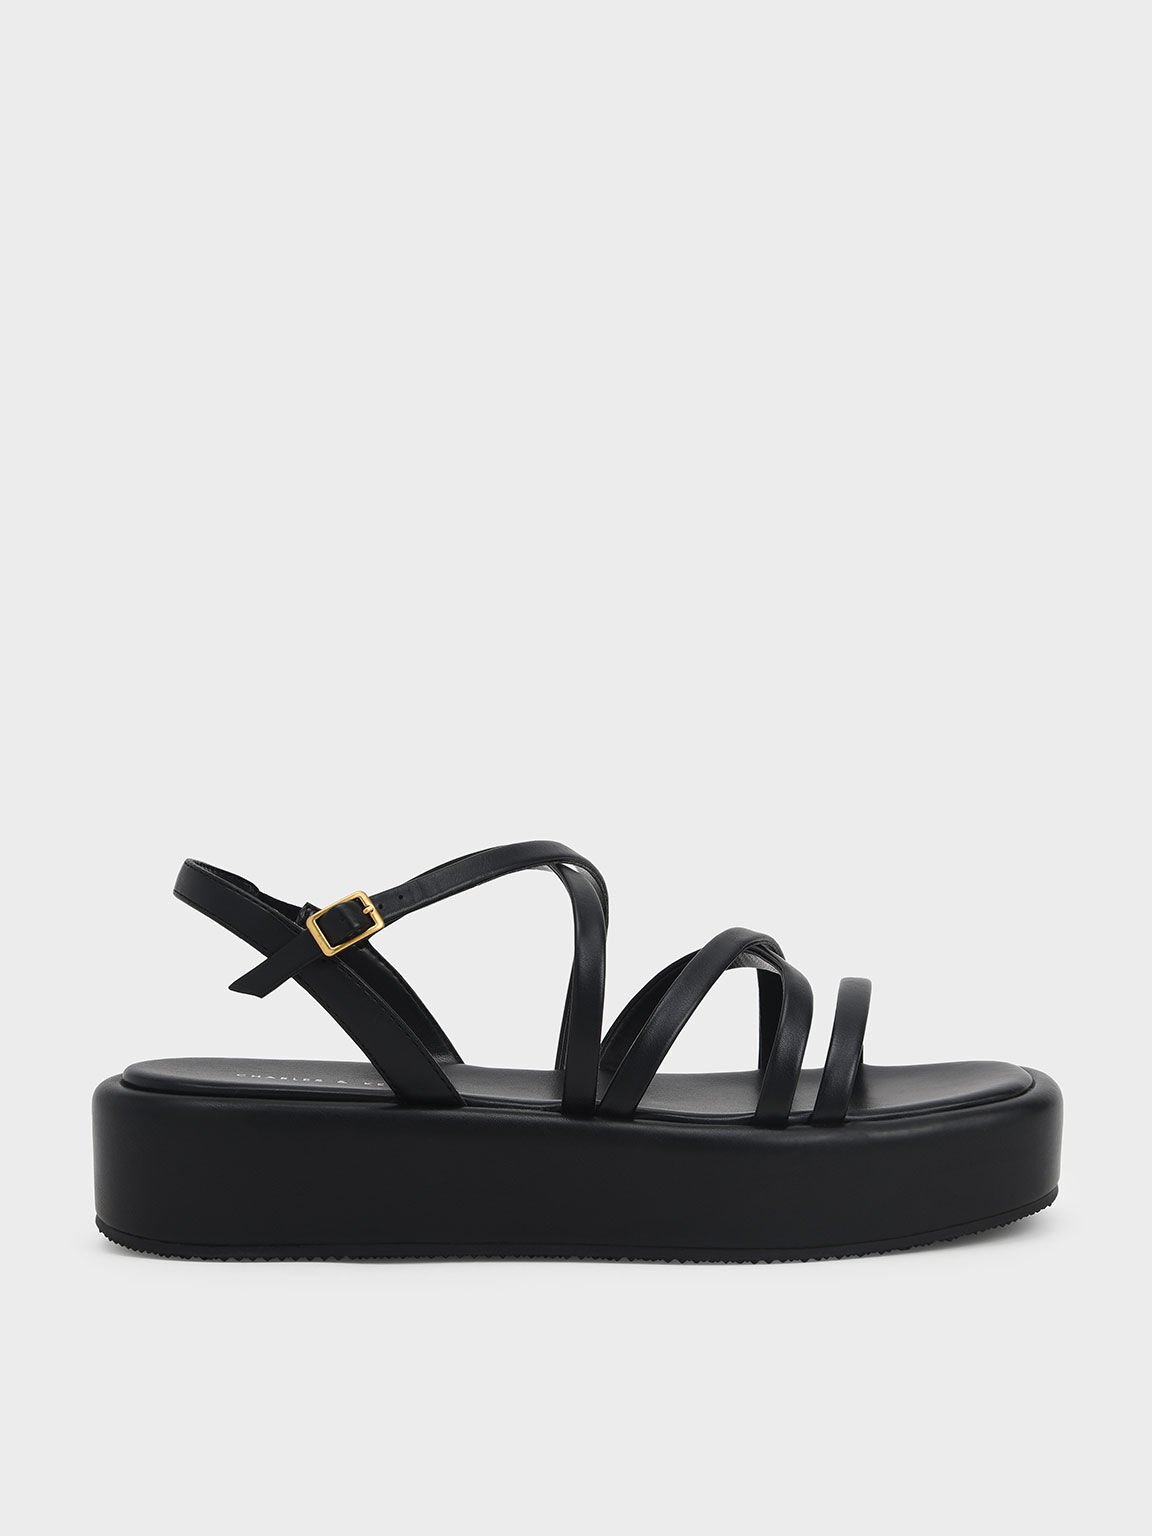 White Criss Cross Sandals CHARLES KEITH SE | rededuct.com